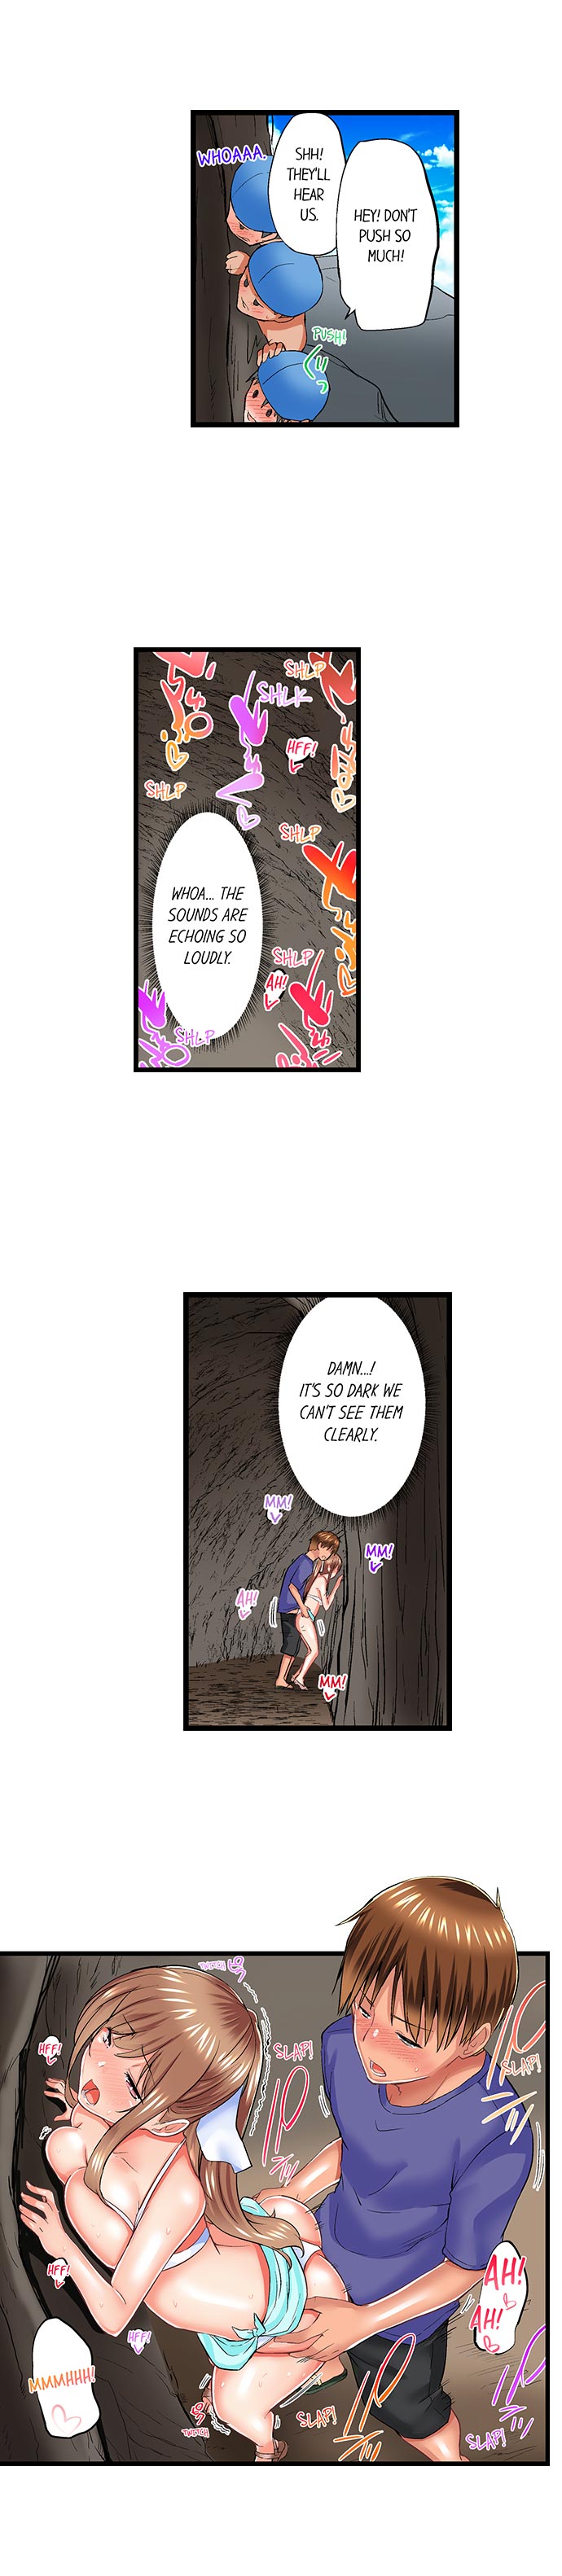 My Brother’s Slipped Inside Me in The Bathtub - Chapter 60 Page 4